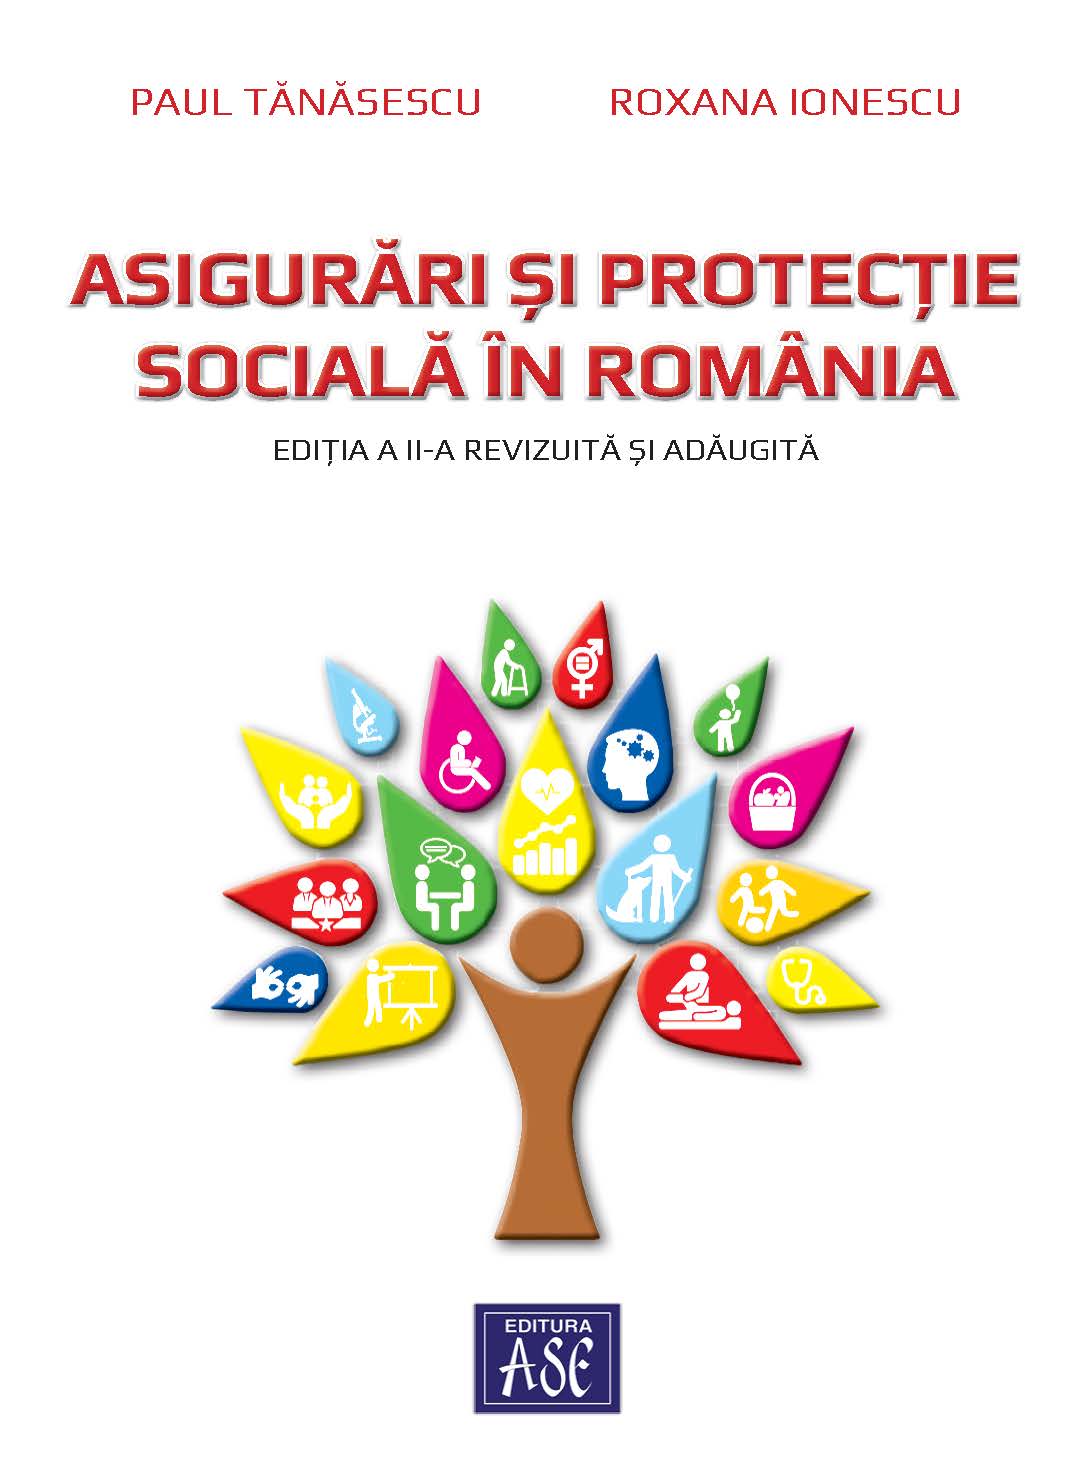 Insurance and Social Protection in Romania (2nd edition revised and added)